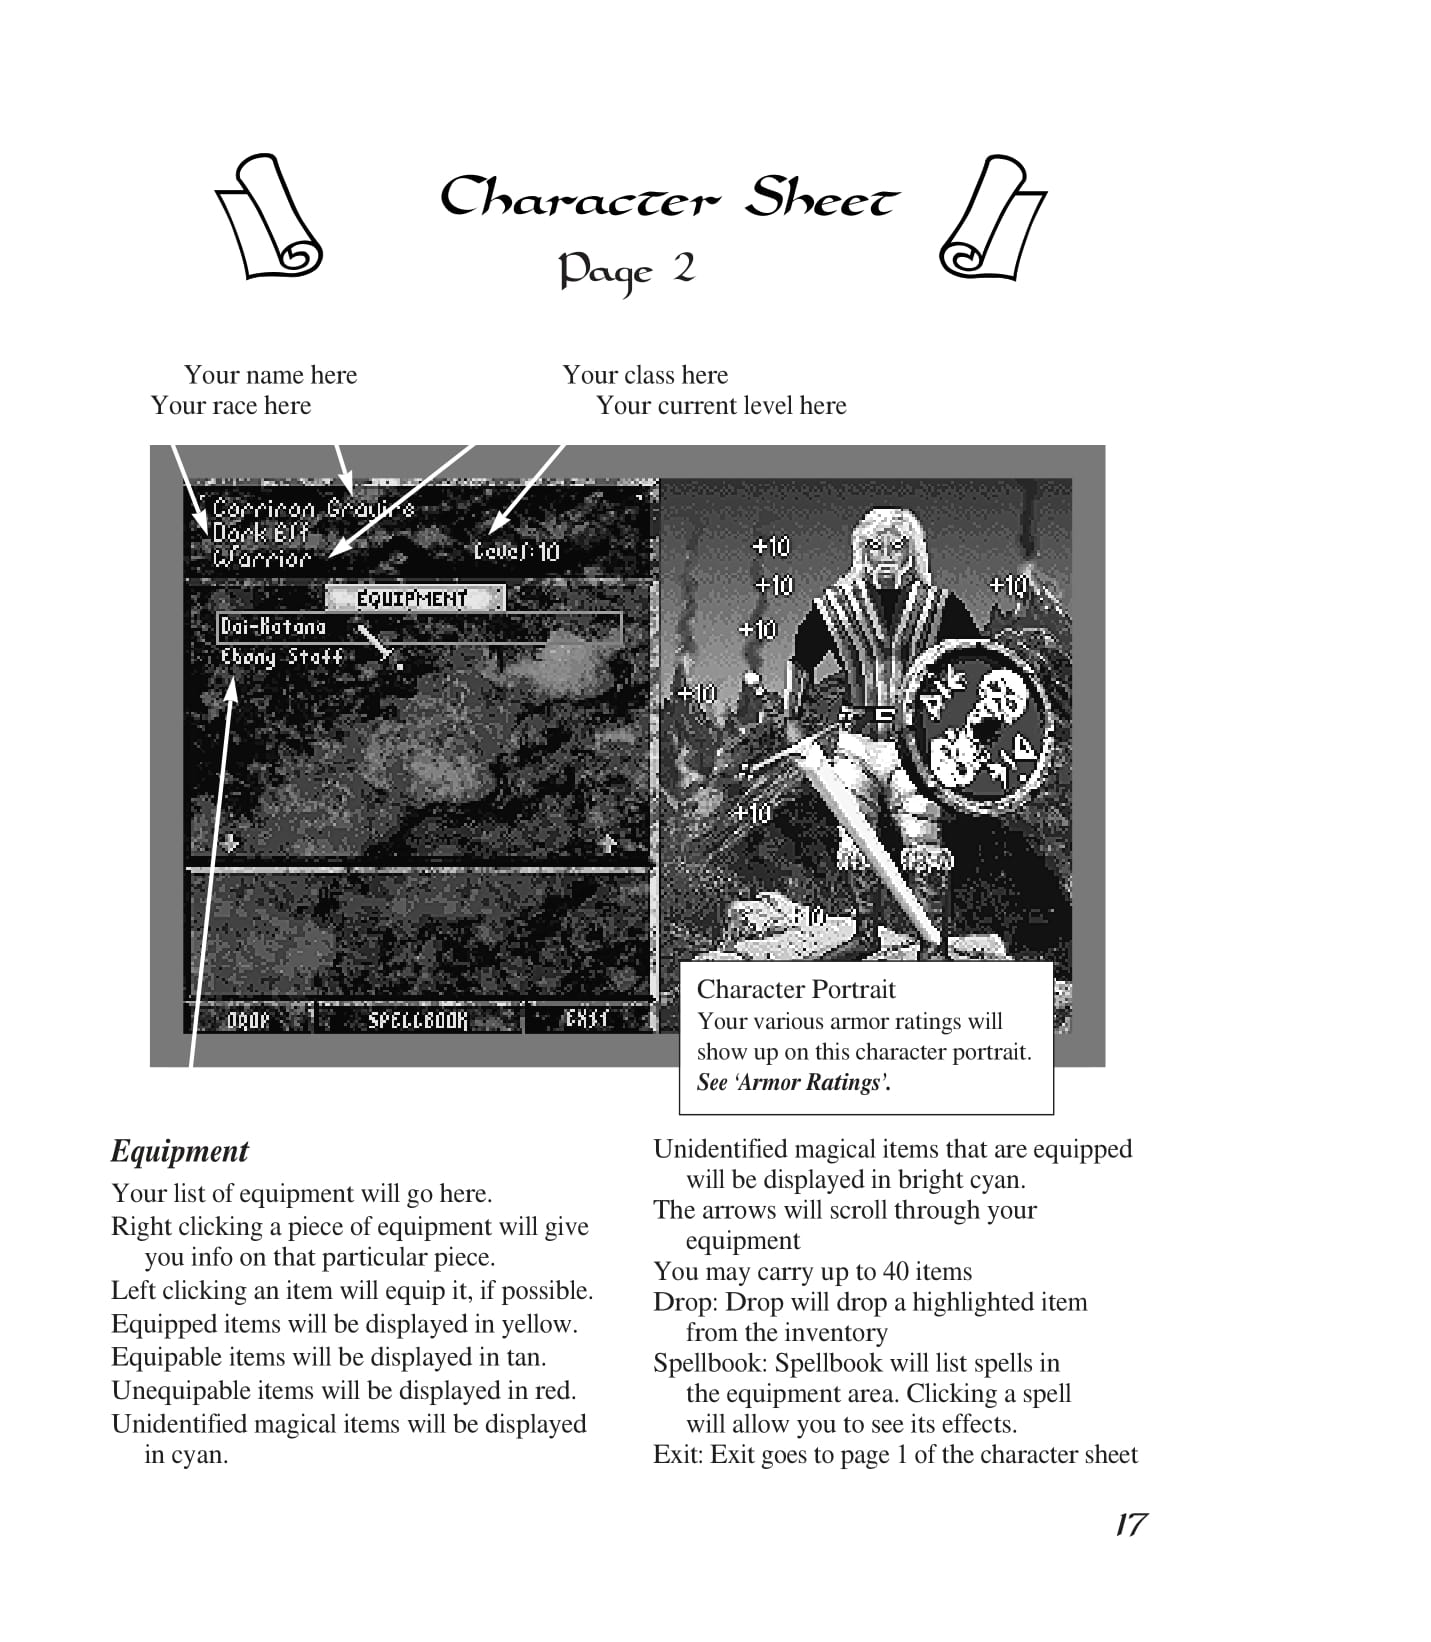 Player's Guide image 27